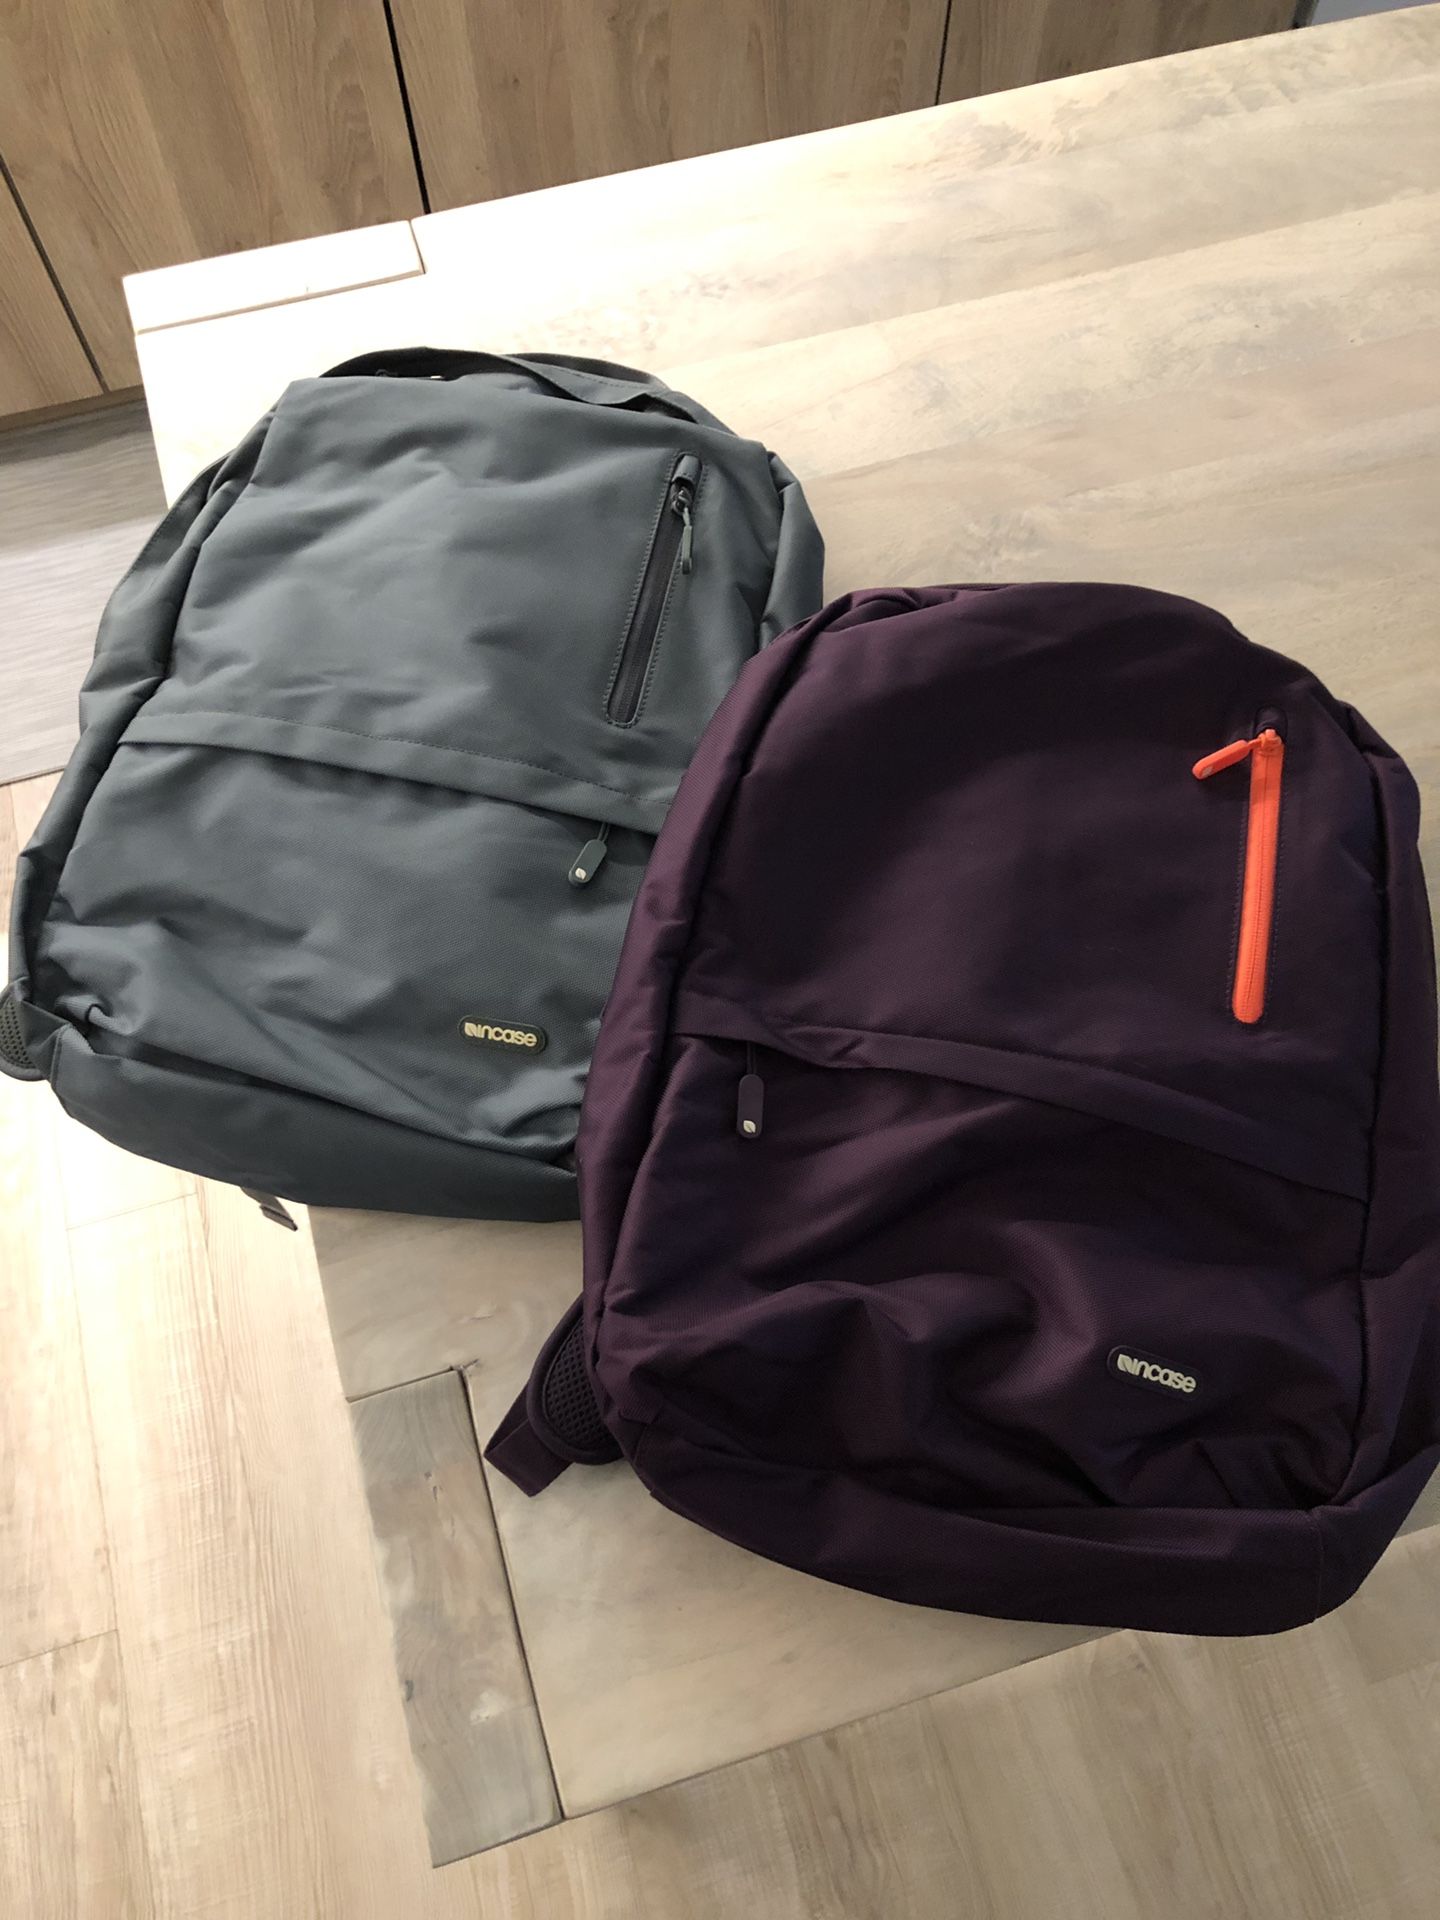 INCASE backpacks with soft built in laptop sleeve